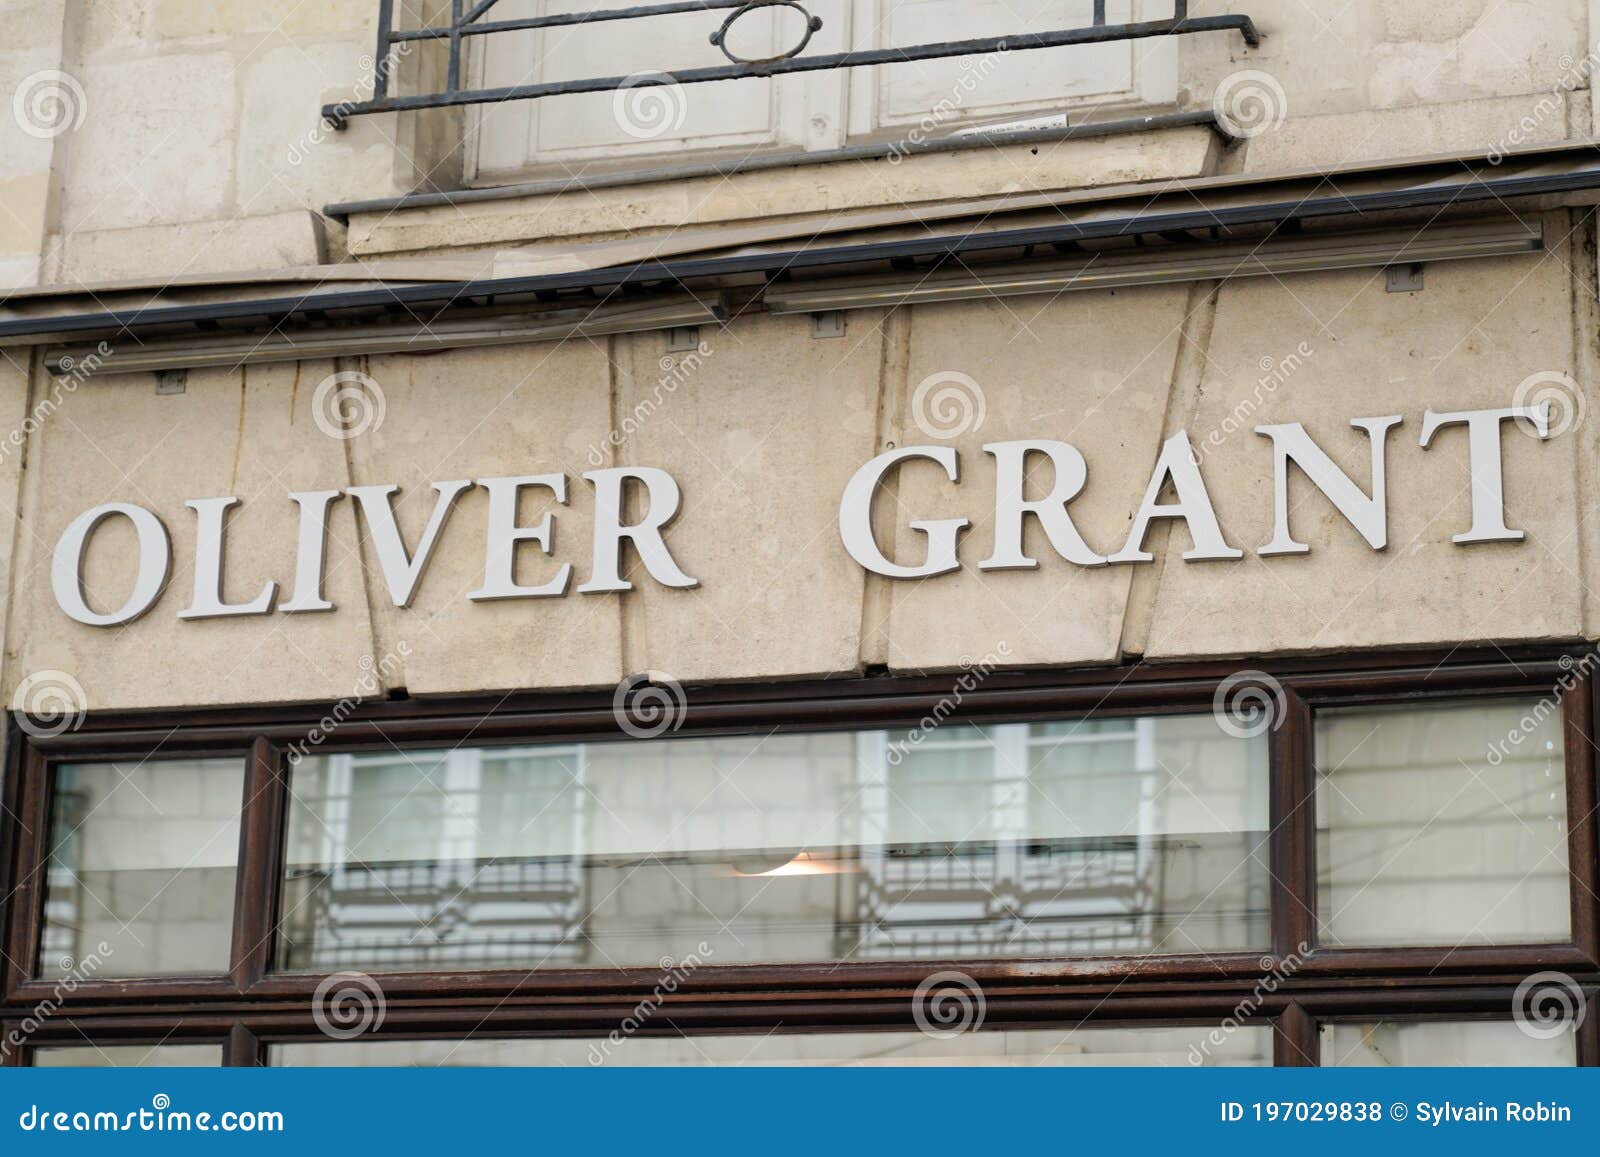 Oliver Grant Logo and Text Sign of Outlet Store Fashion Luxury Store ...